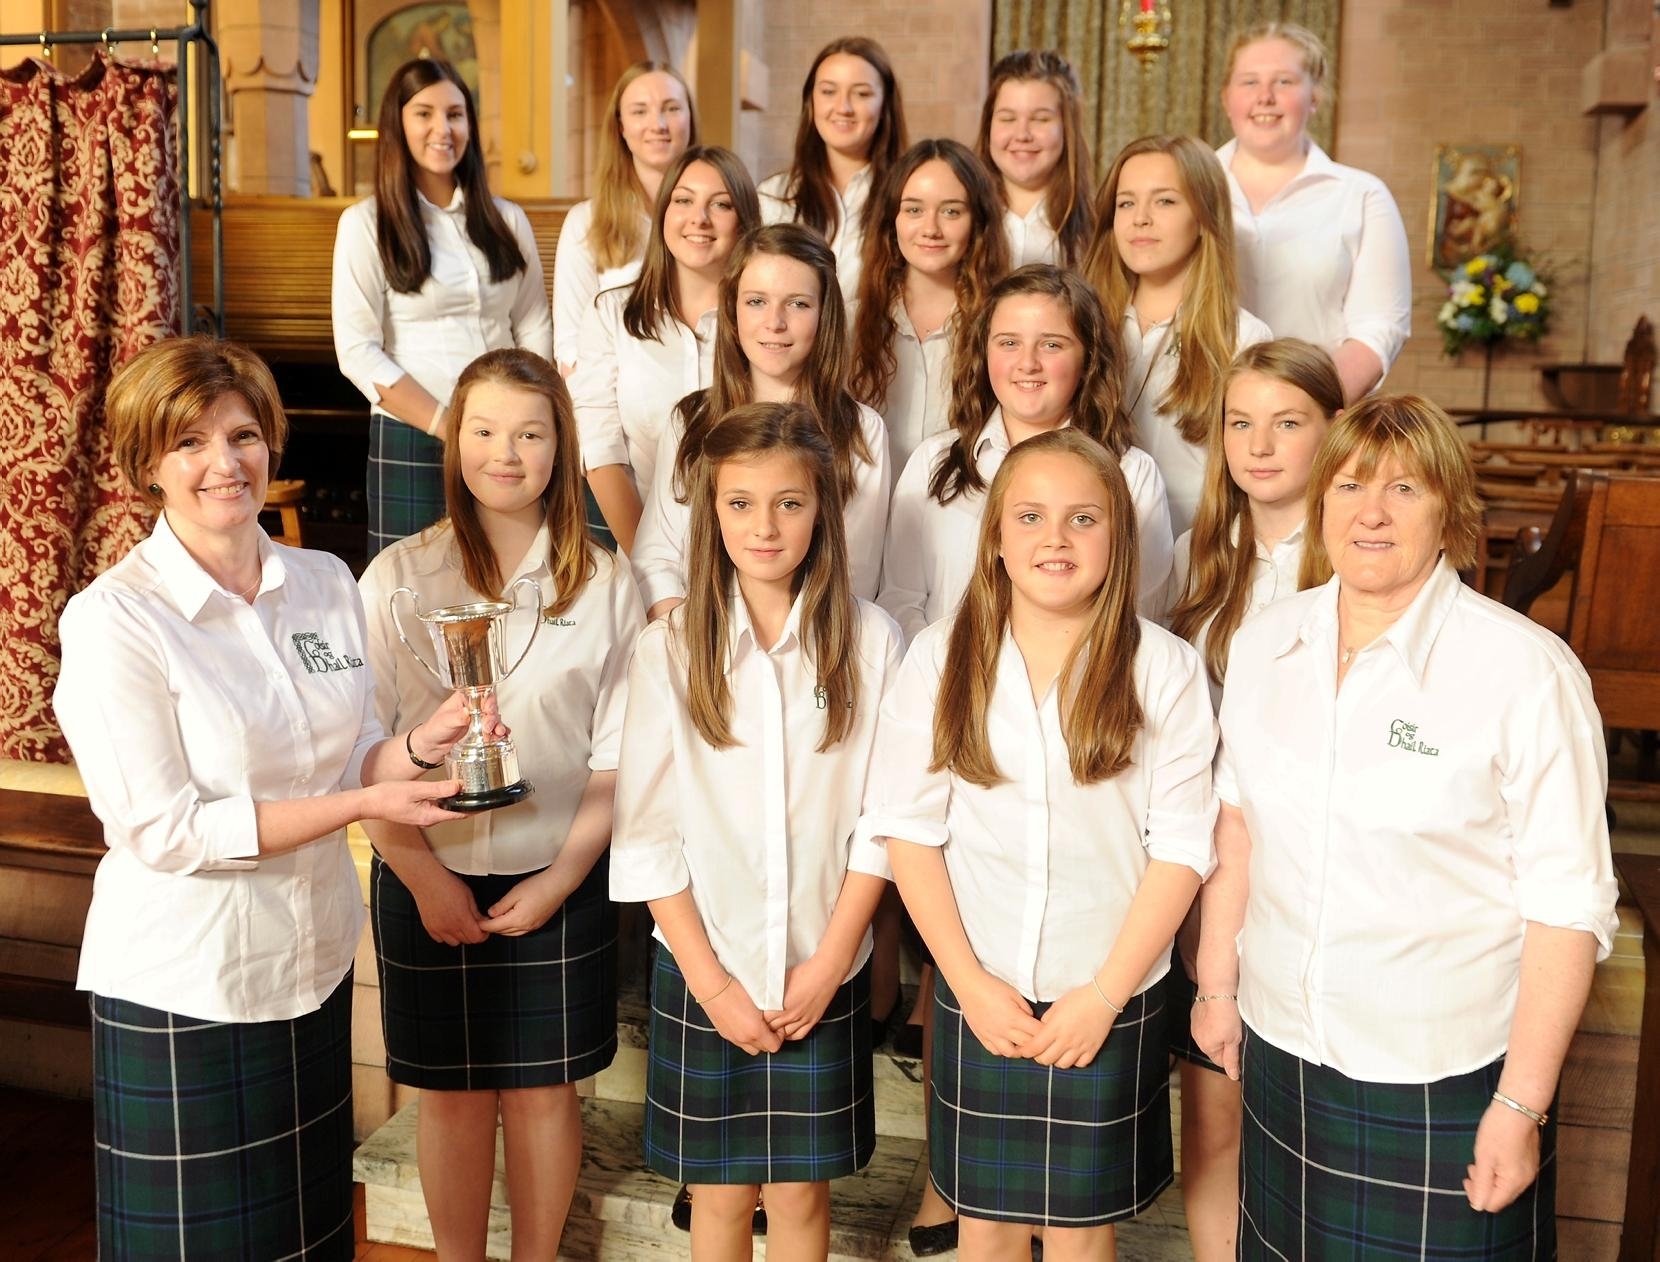 Picture by SANDY McCOOK   12th October '15 Royal National Mod, Oban 2015  Dalriada Gaelic Choir with the Martin Wilson, North Berwick Trophy for Choral singing. Holding the trophy is conductor Fiona Munro while on the right is Gaelic tutor Christine Johnstone.